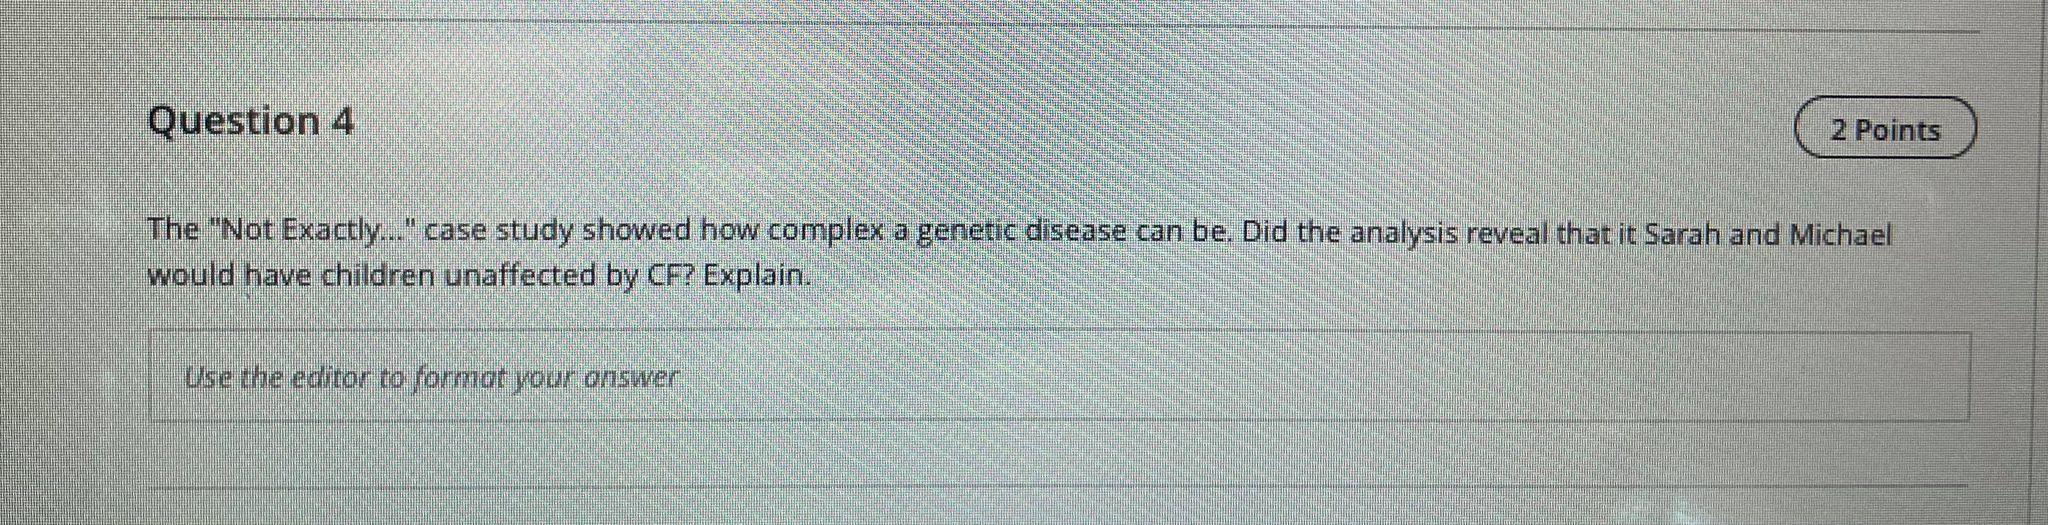 Question 4 2 Points The Not Exactly... case study showed how complex a genetic disease can be. Did the analysis reveal that